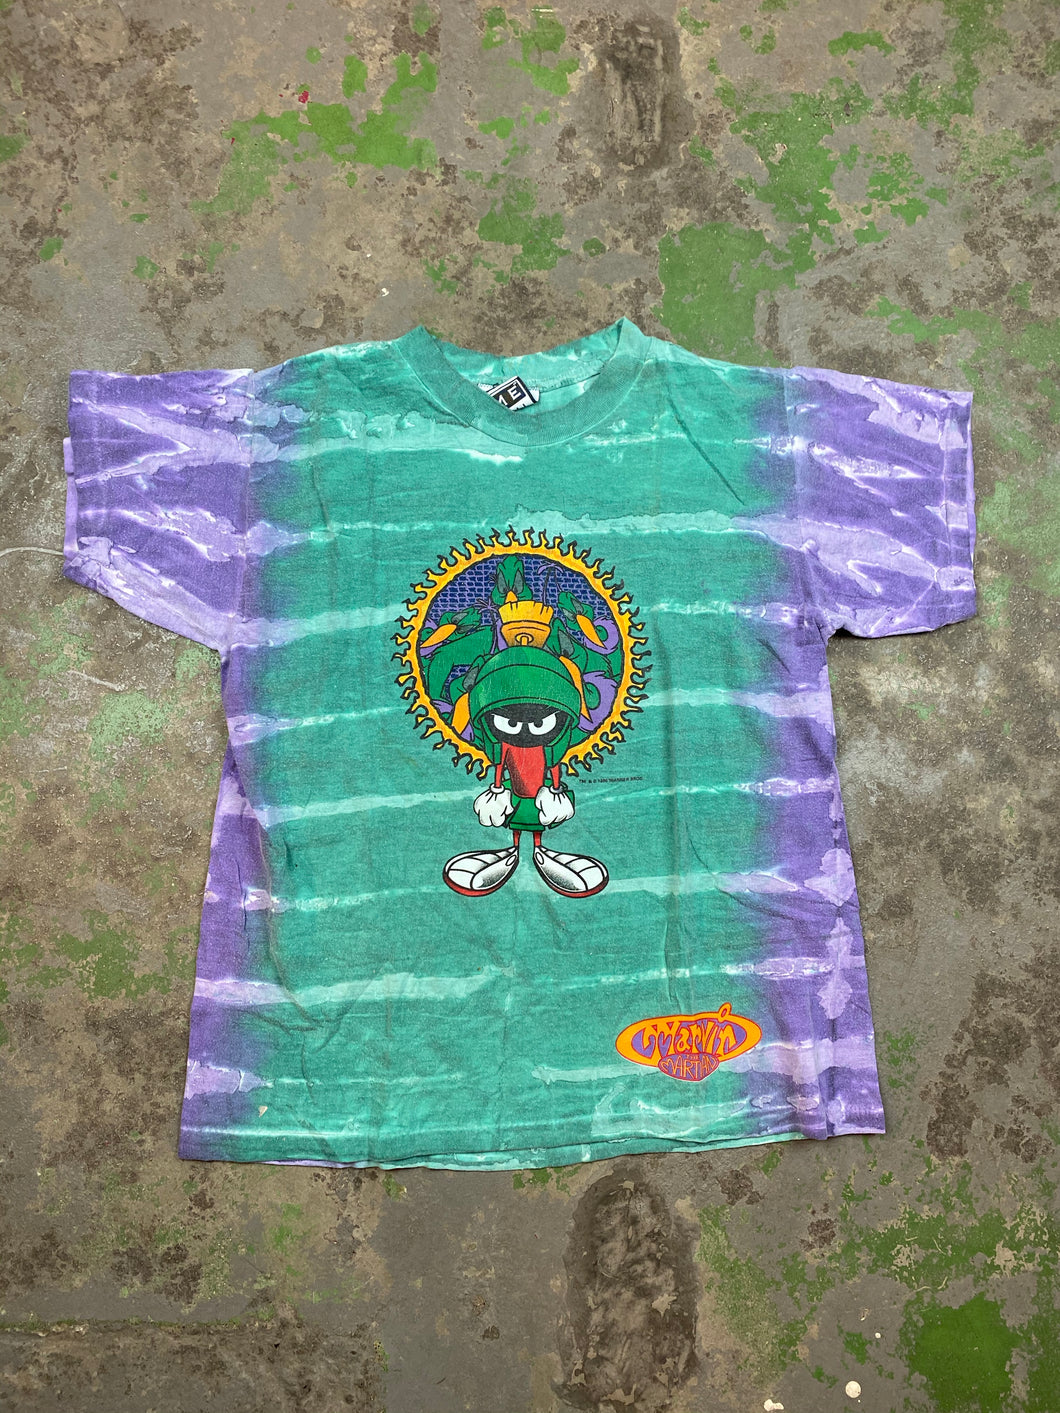 1996 Marvin t shirt